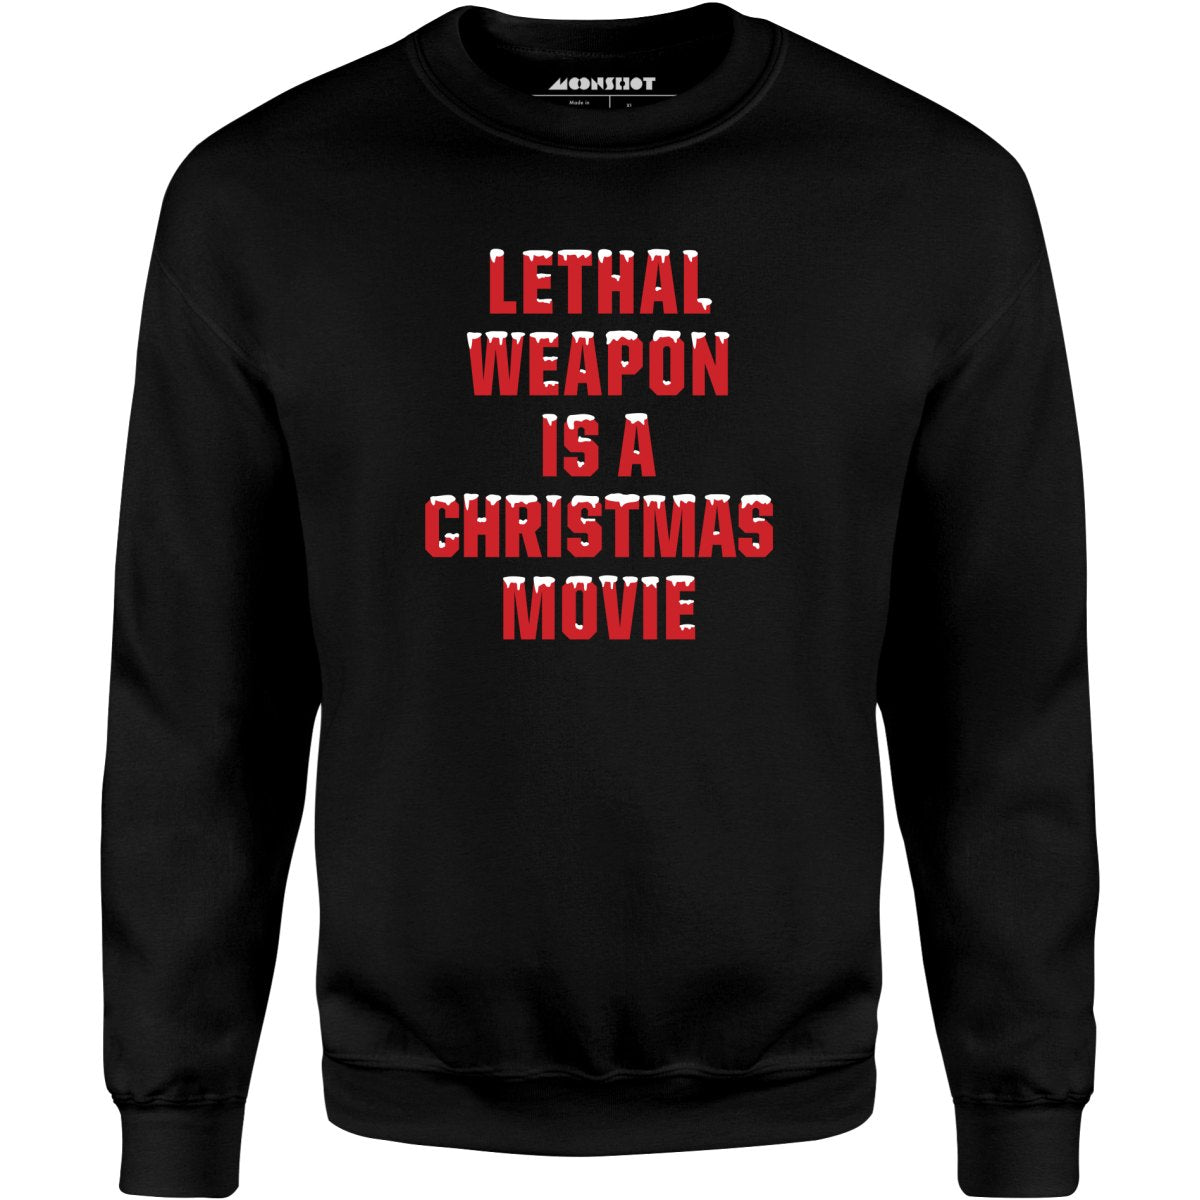 Lethal Weapon is a Christmas Movie - Unisex Sweatshirt